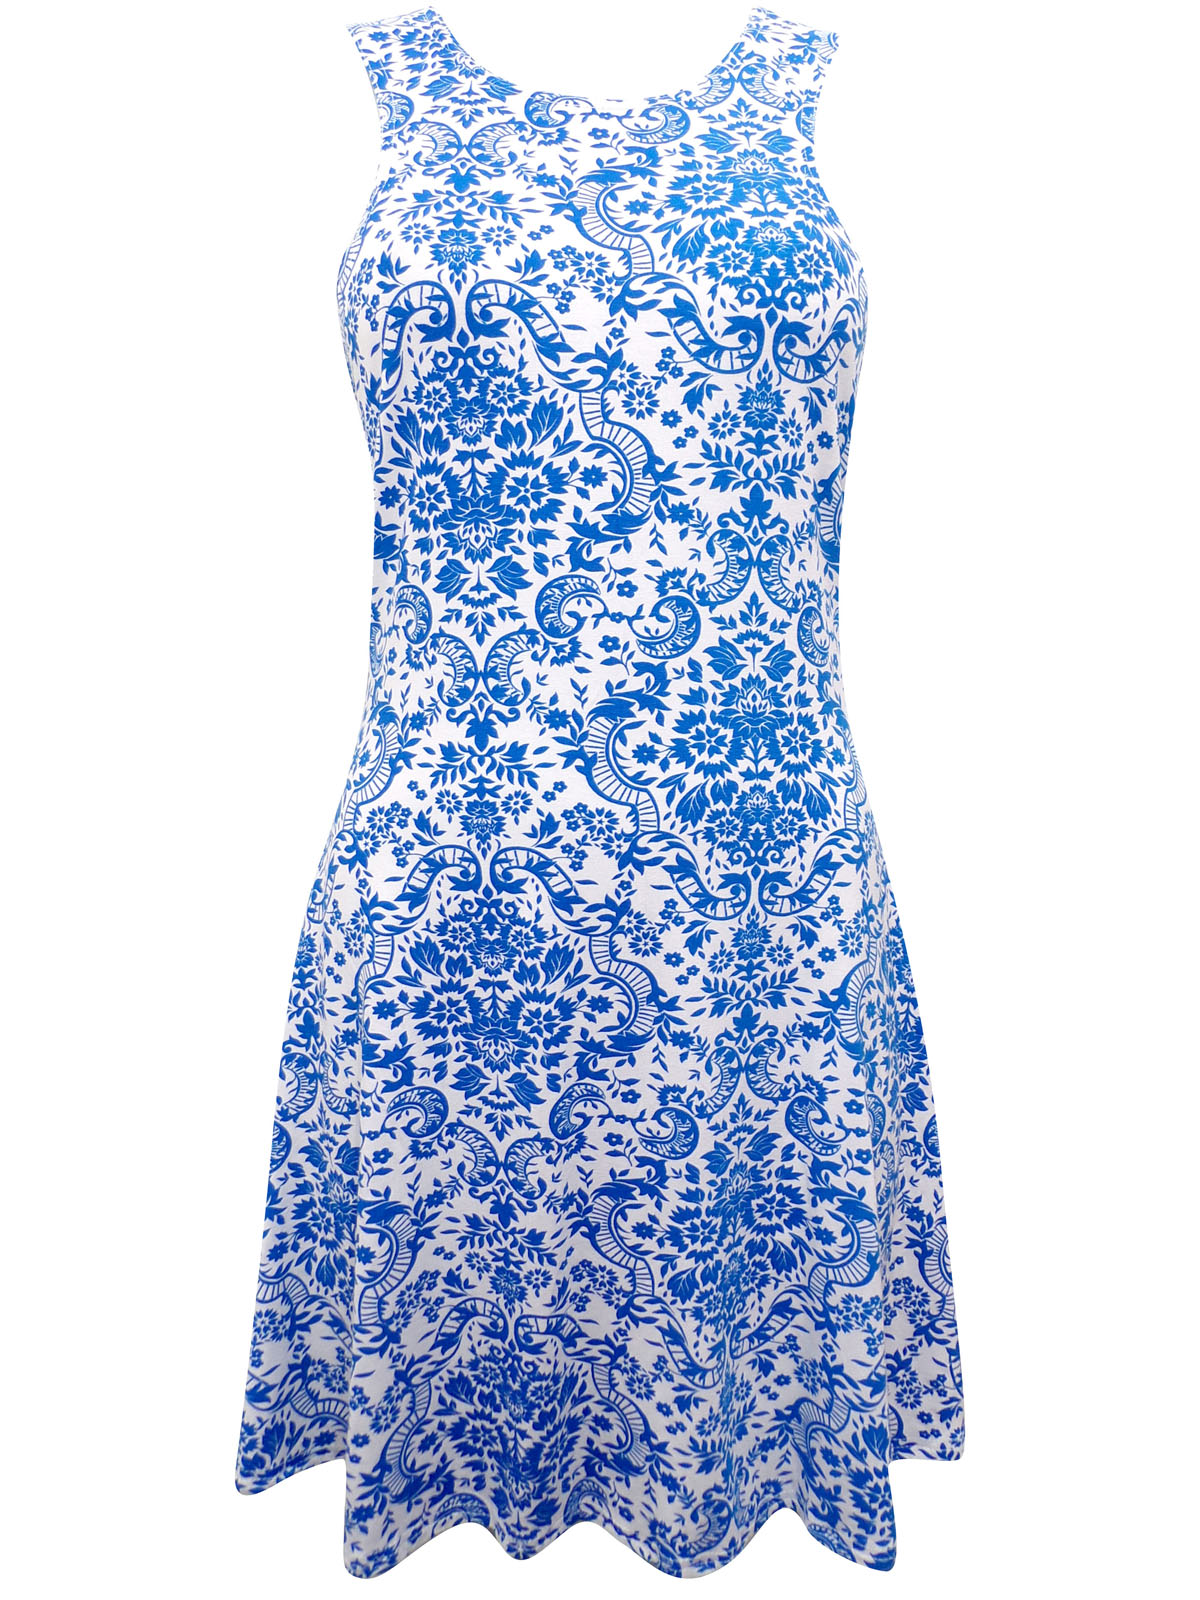 Missguided - - Missguided BLUE Printed Fit & Flare Dress - Size 10 to 12